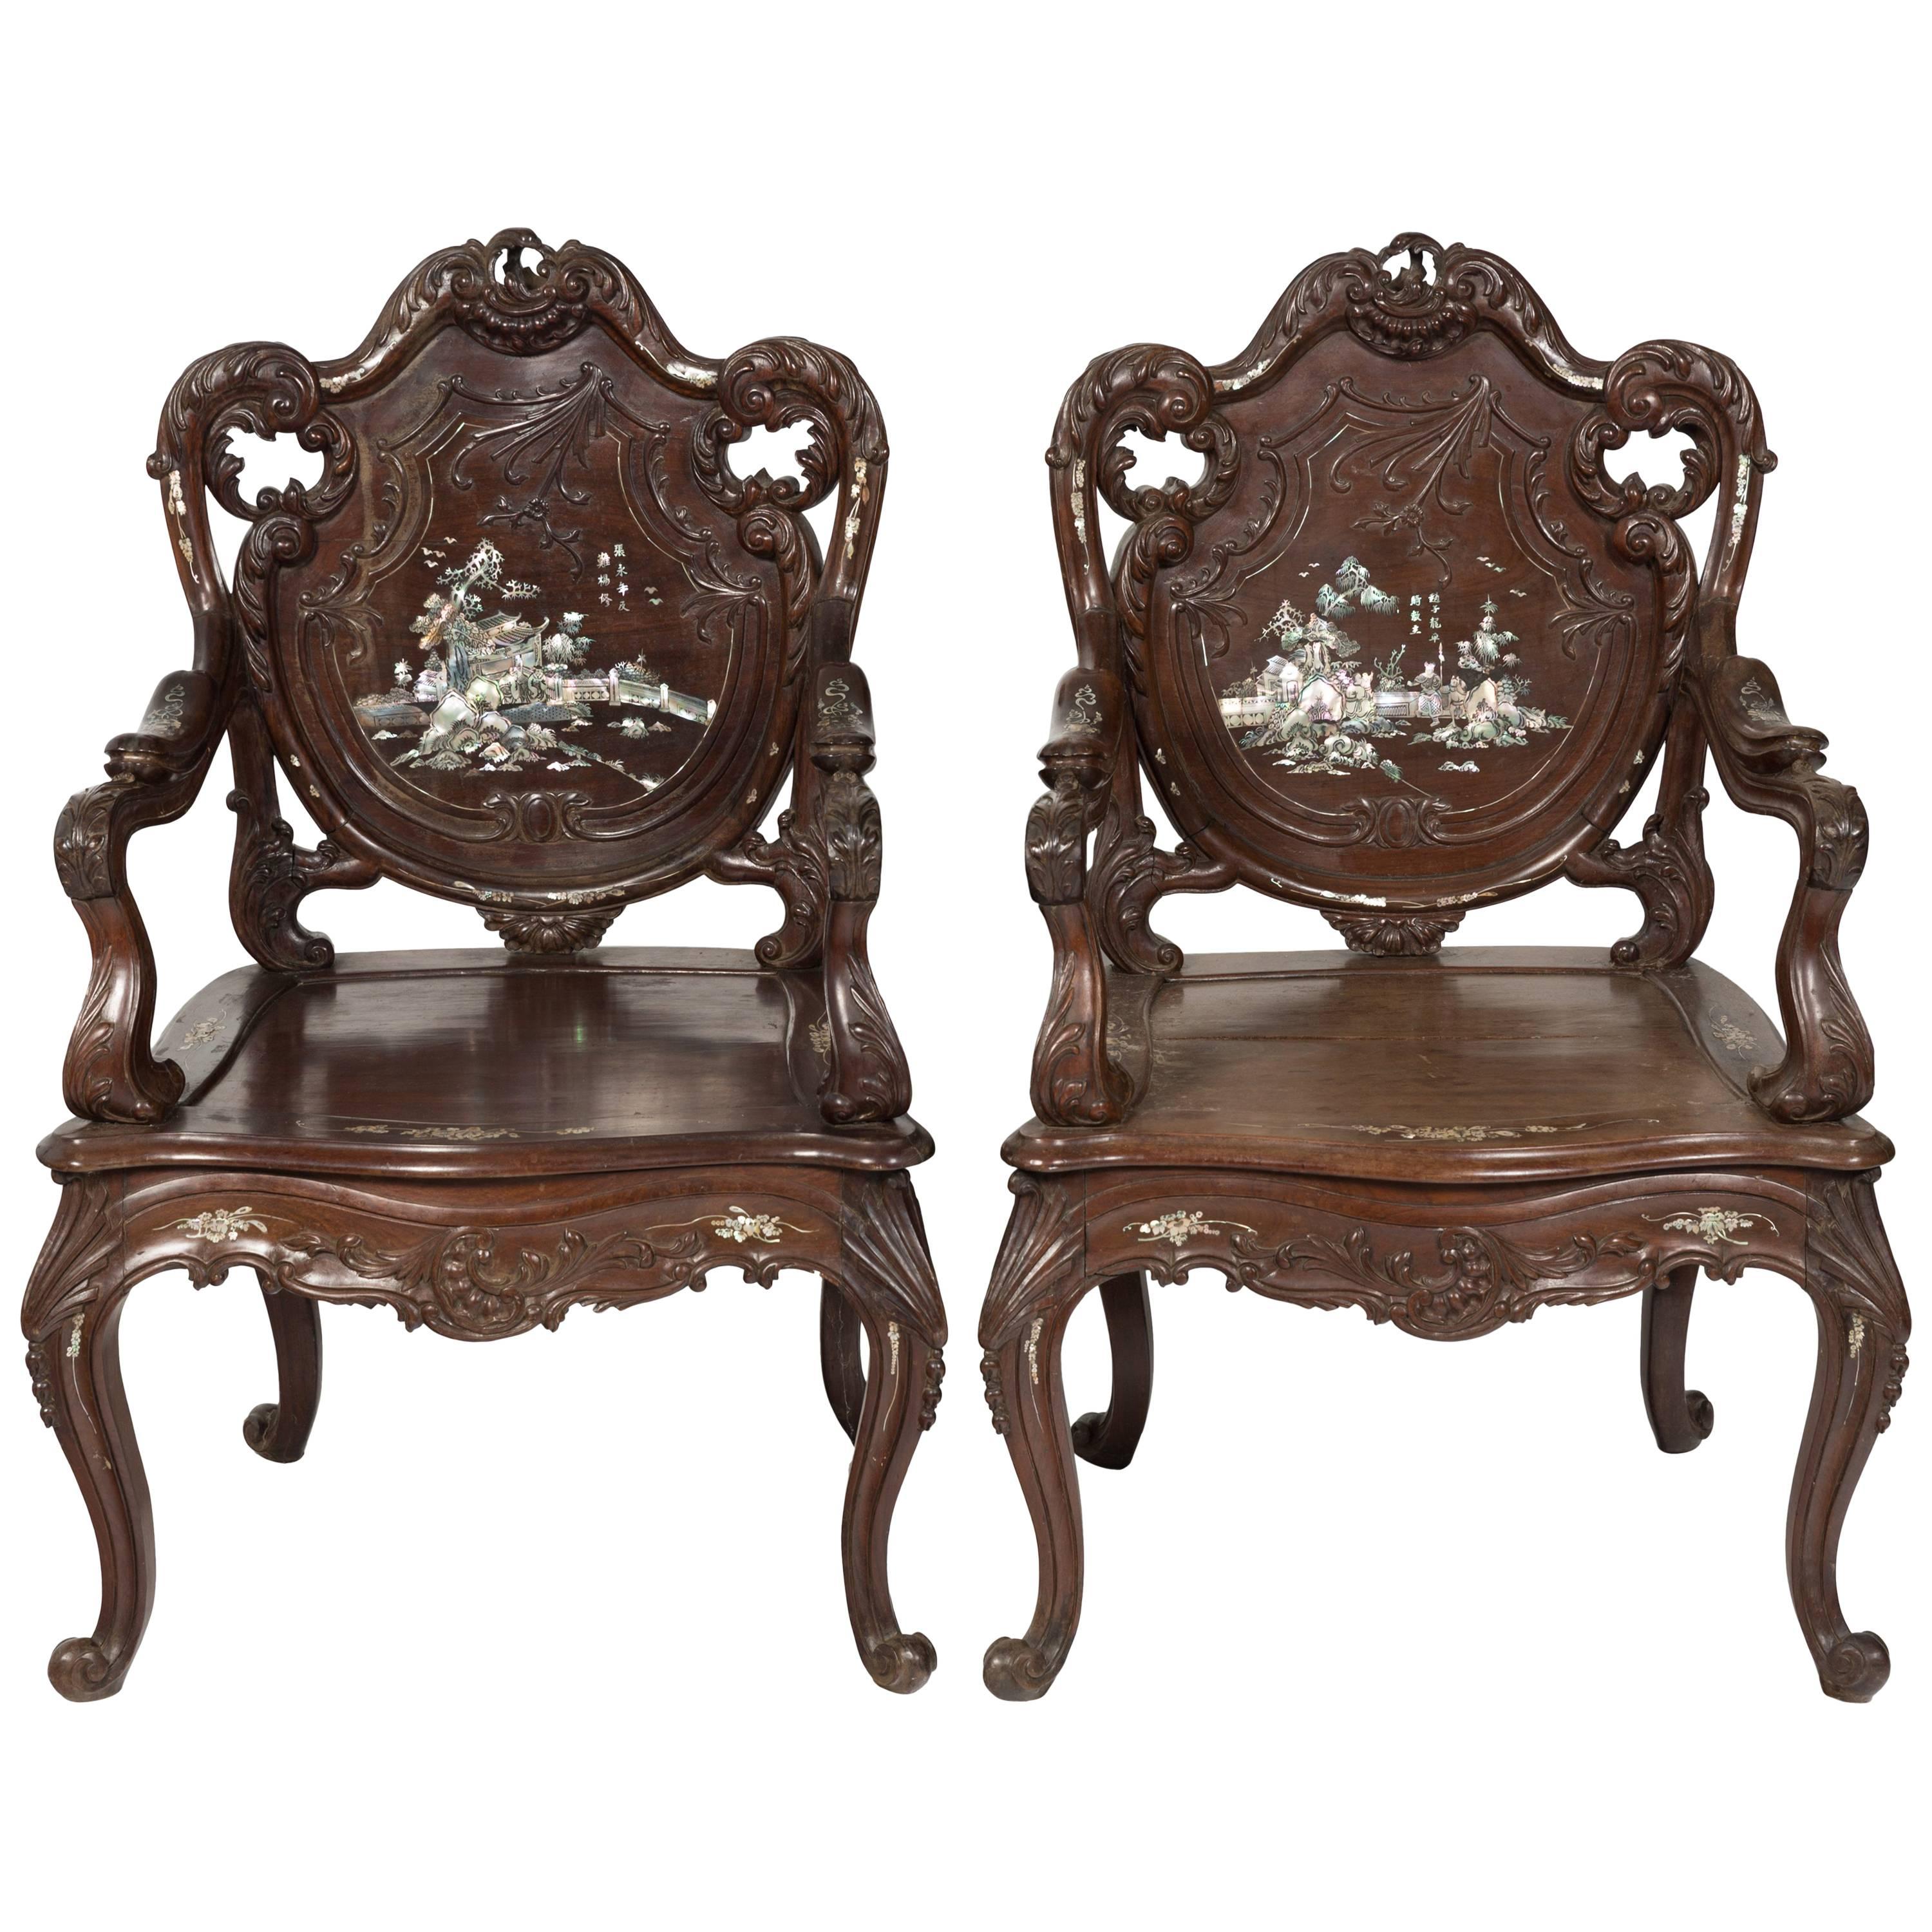 Pair of 1960s Asian Carved Rosewood Chairs with Mother-of-Pearl Inlay